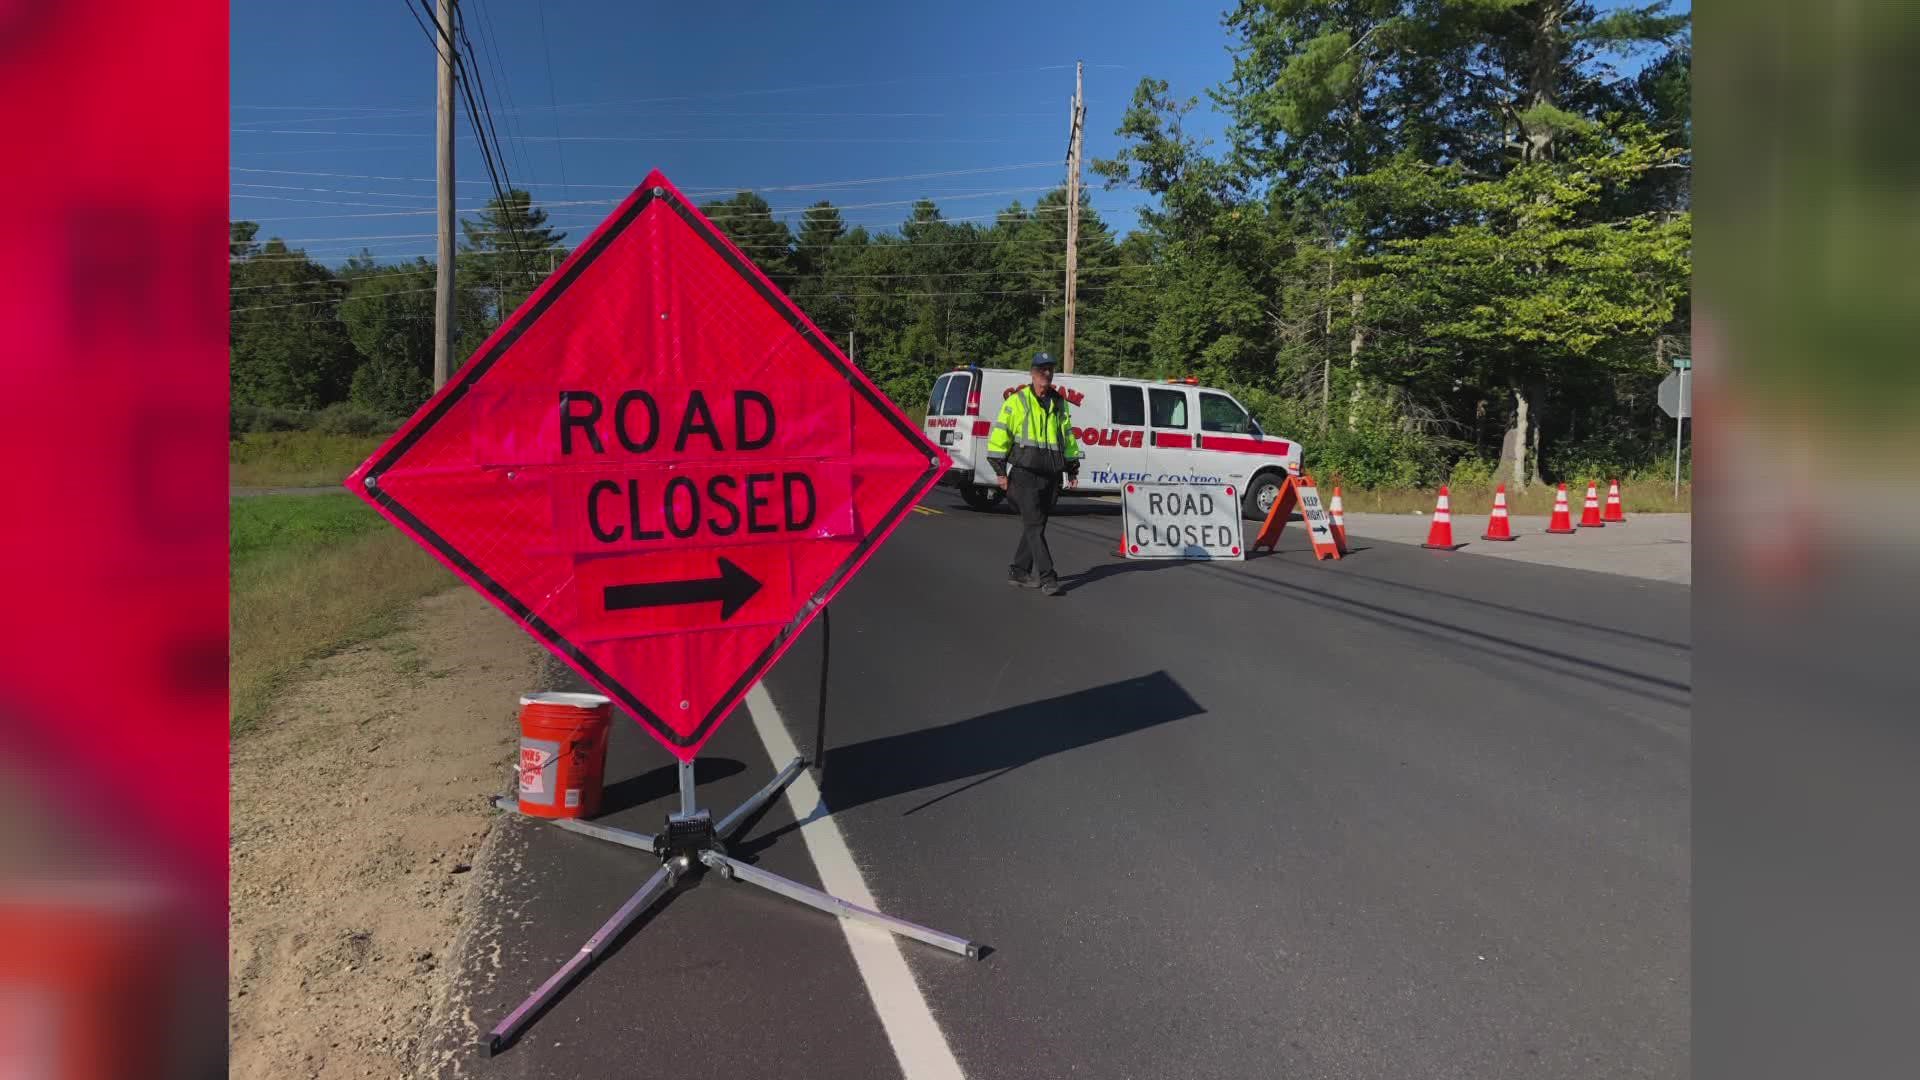 It happened around 8 a.m. Thursday on Route 22, in the area of Hodgdon Road, Gorham Police Chief Christopher Sanborn told NEWS CENTER Maine.